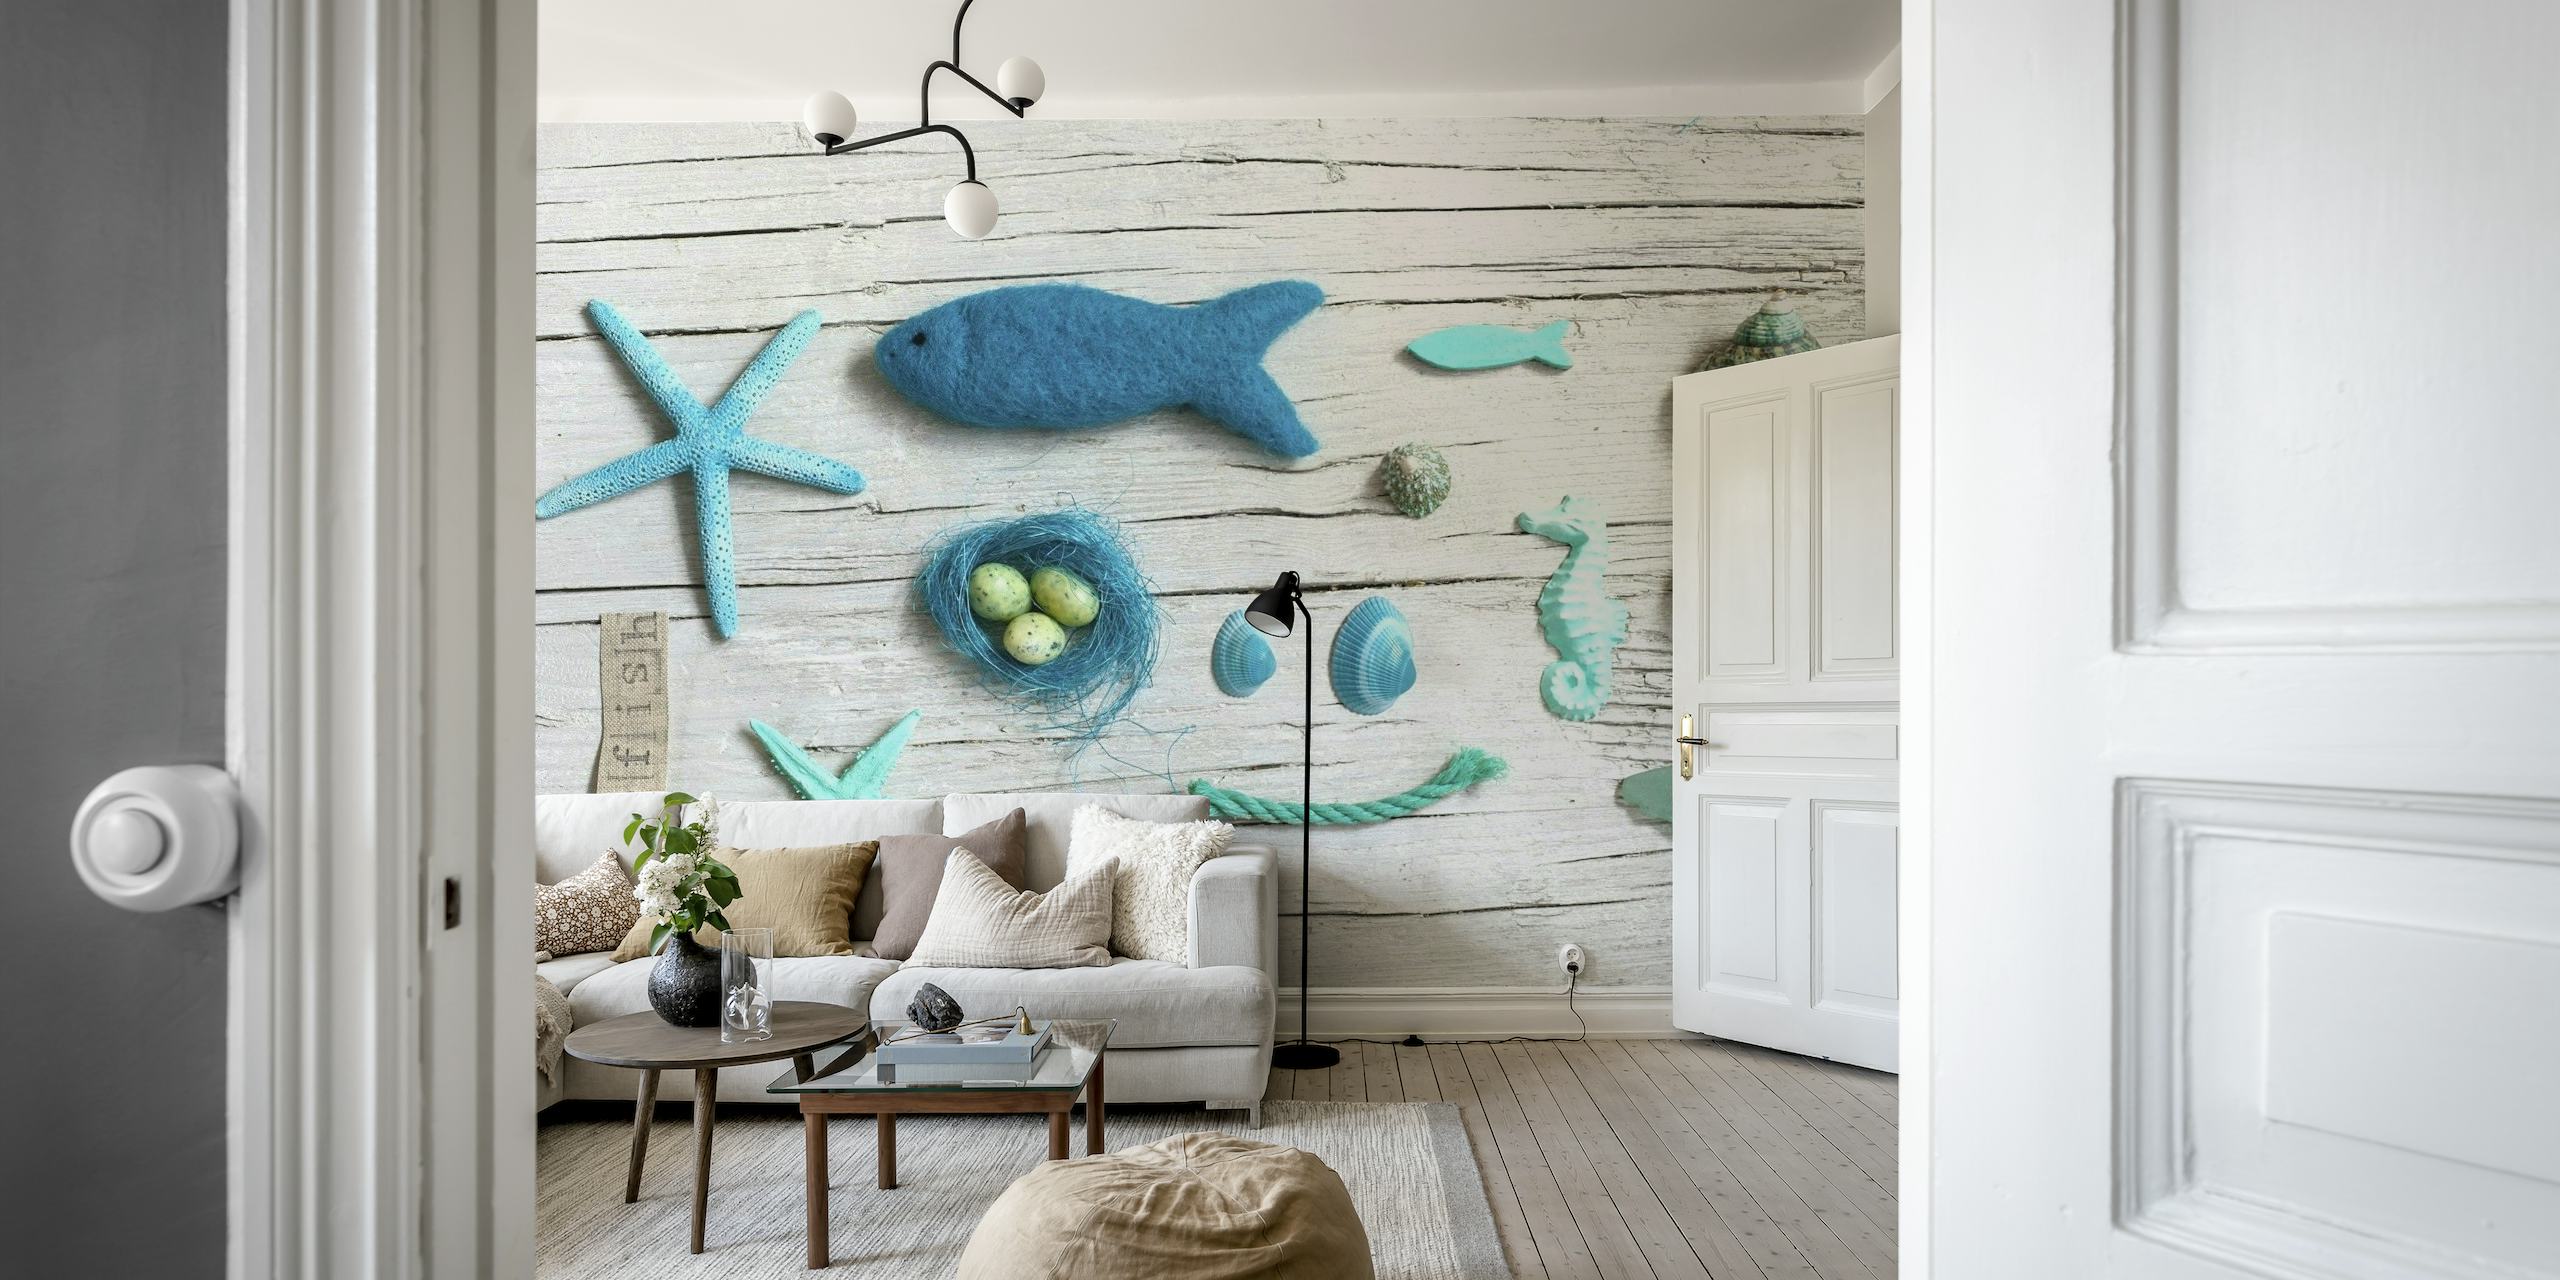 Coastal inspired Ocean Jetsam Collage Art wall mural featuring marine elements on a wooden background